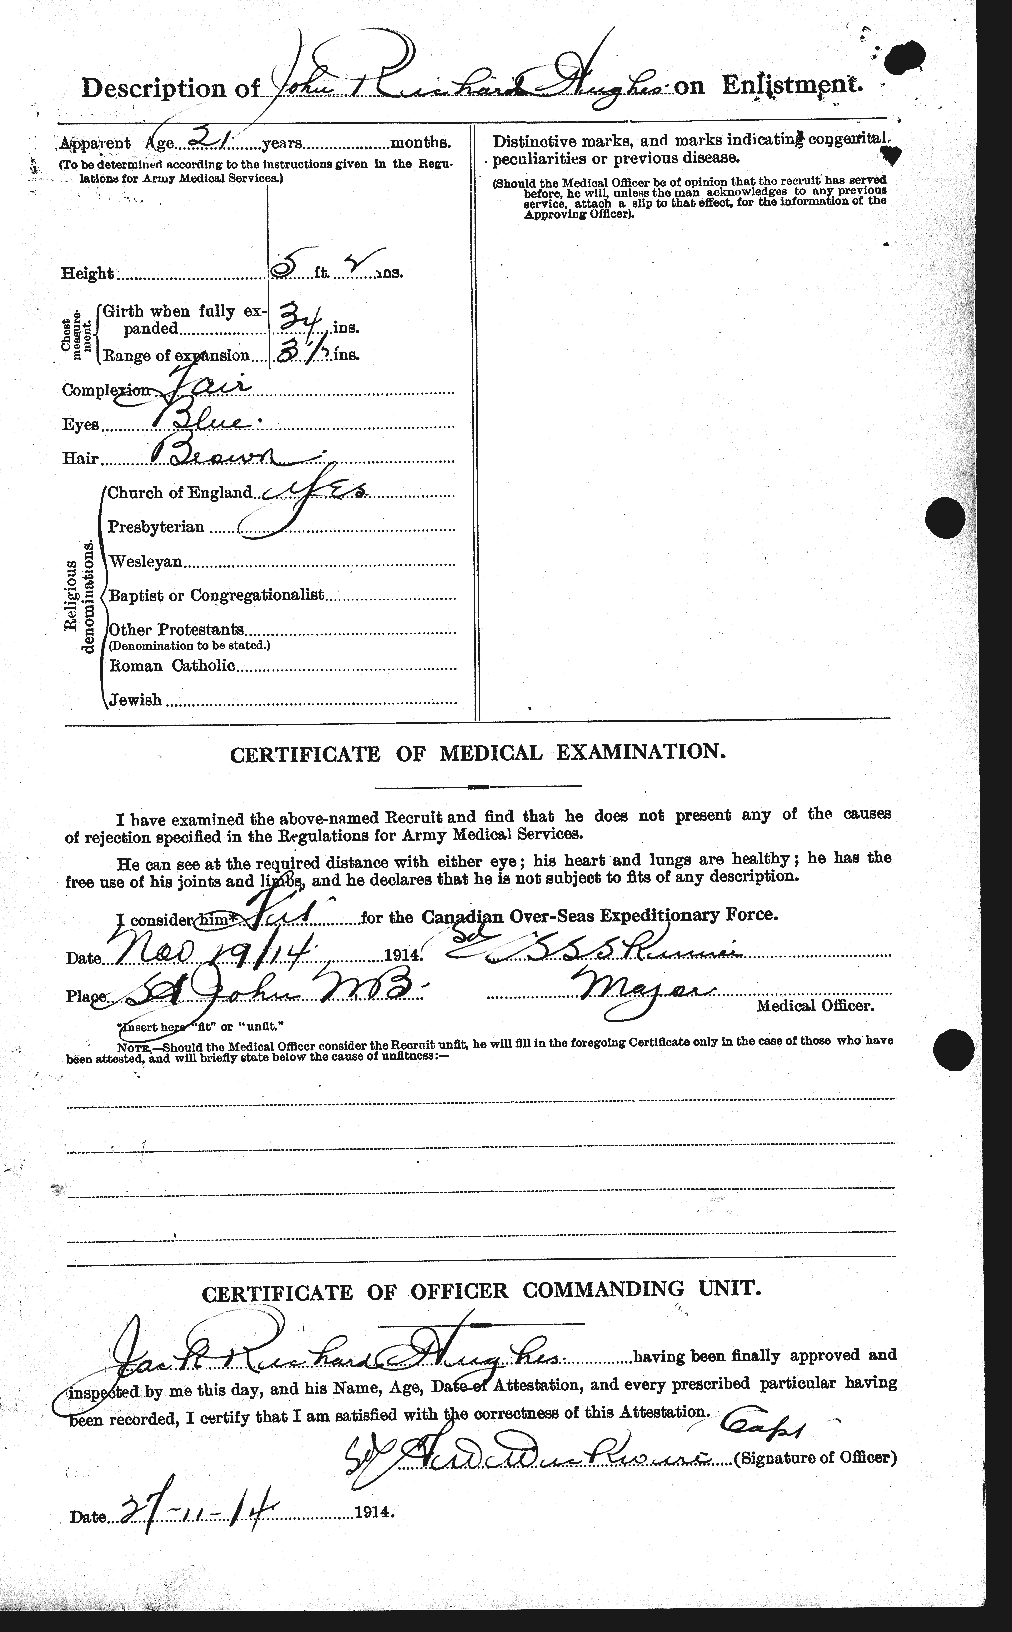 Personnel Records of the First World War - CEF 404046b